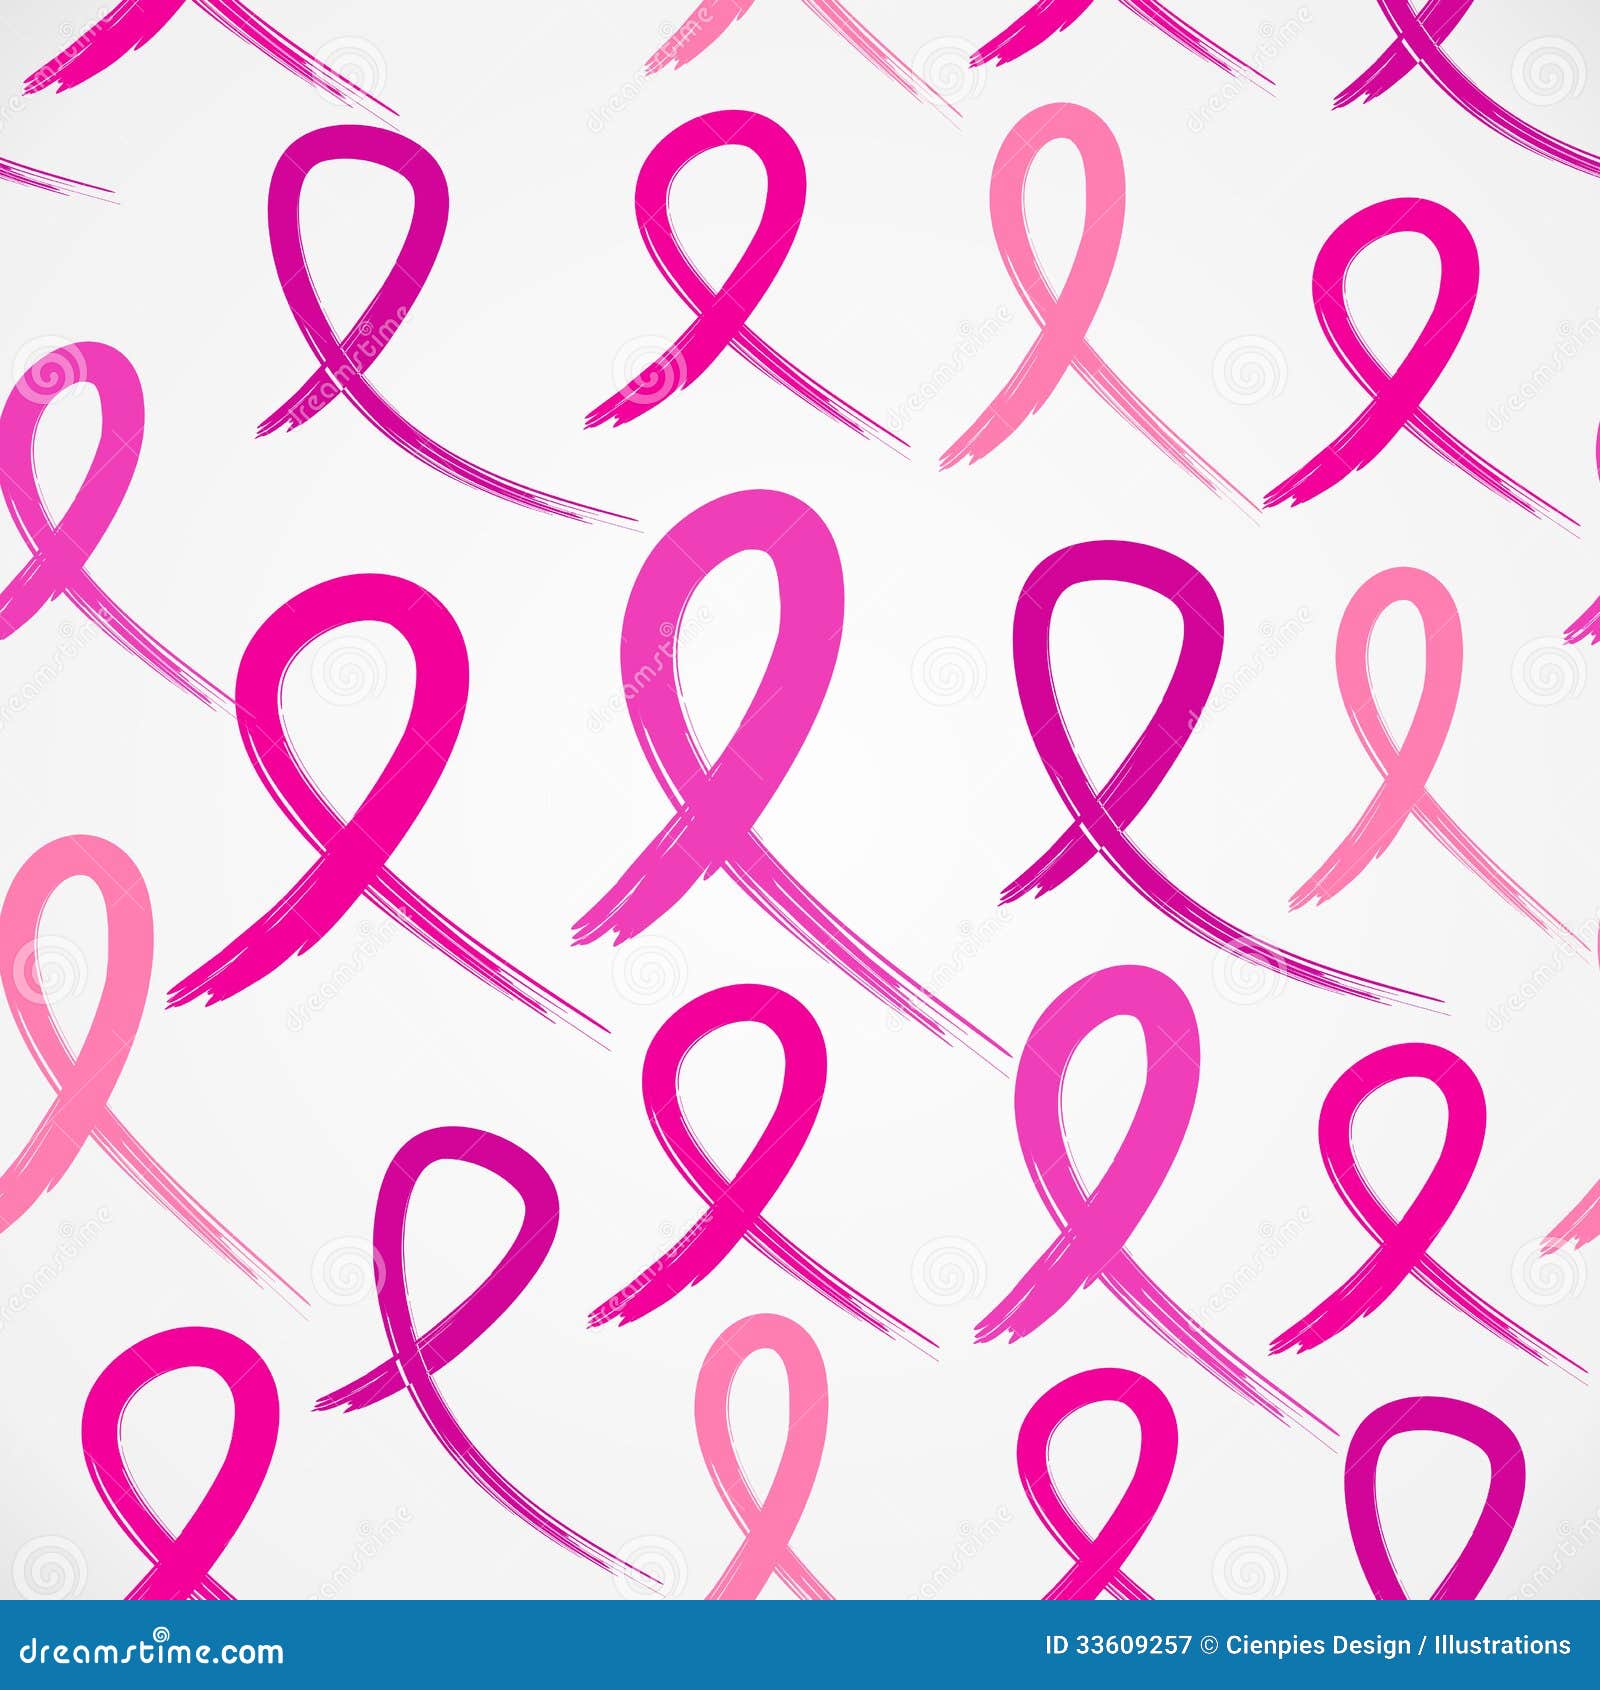 Breast Cancer Awareness Pink Ribbons Seamless Pattern EPS10 File